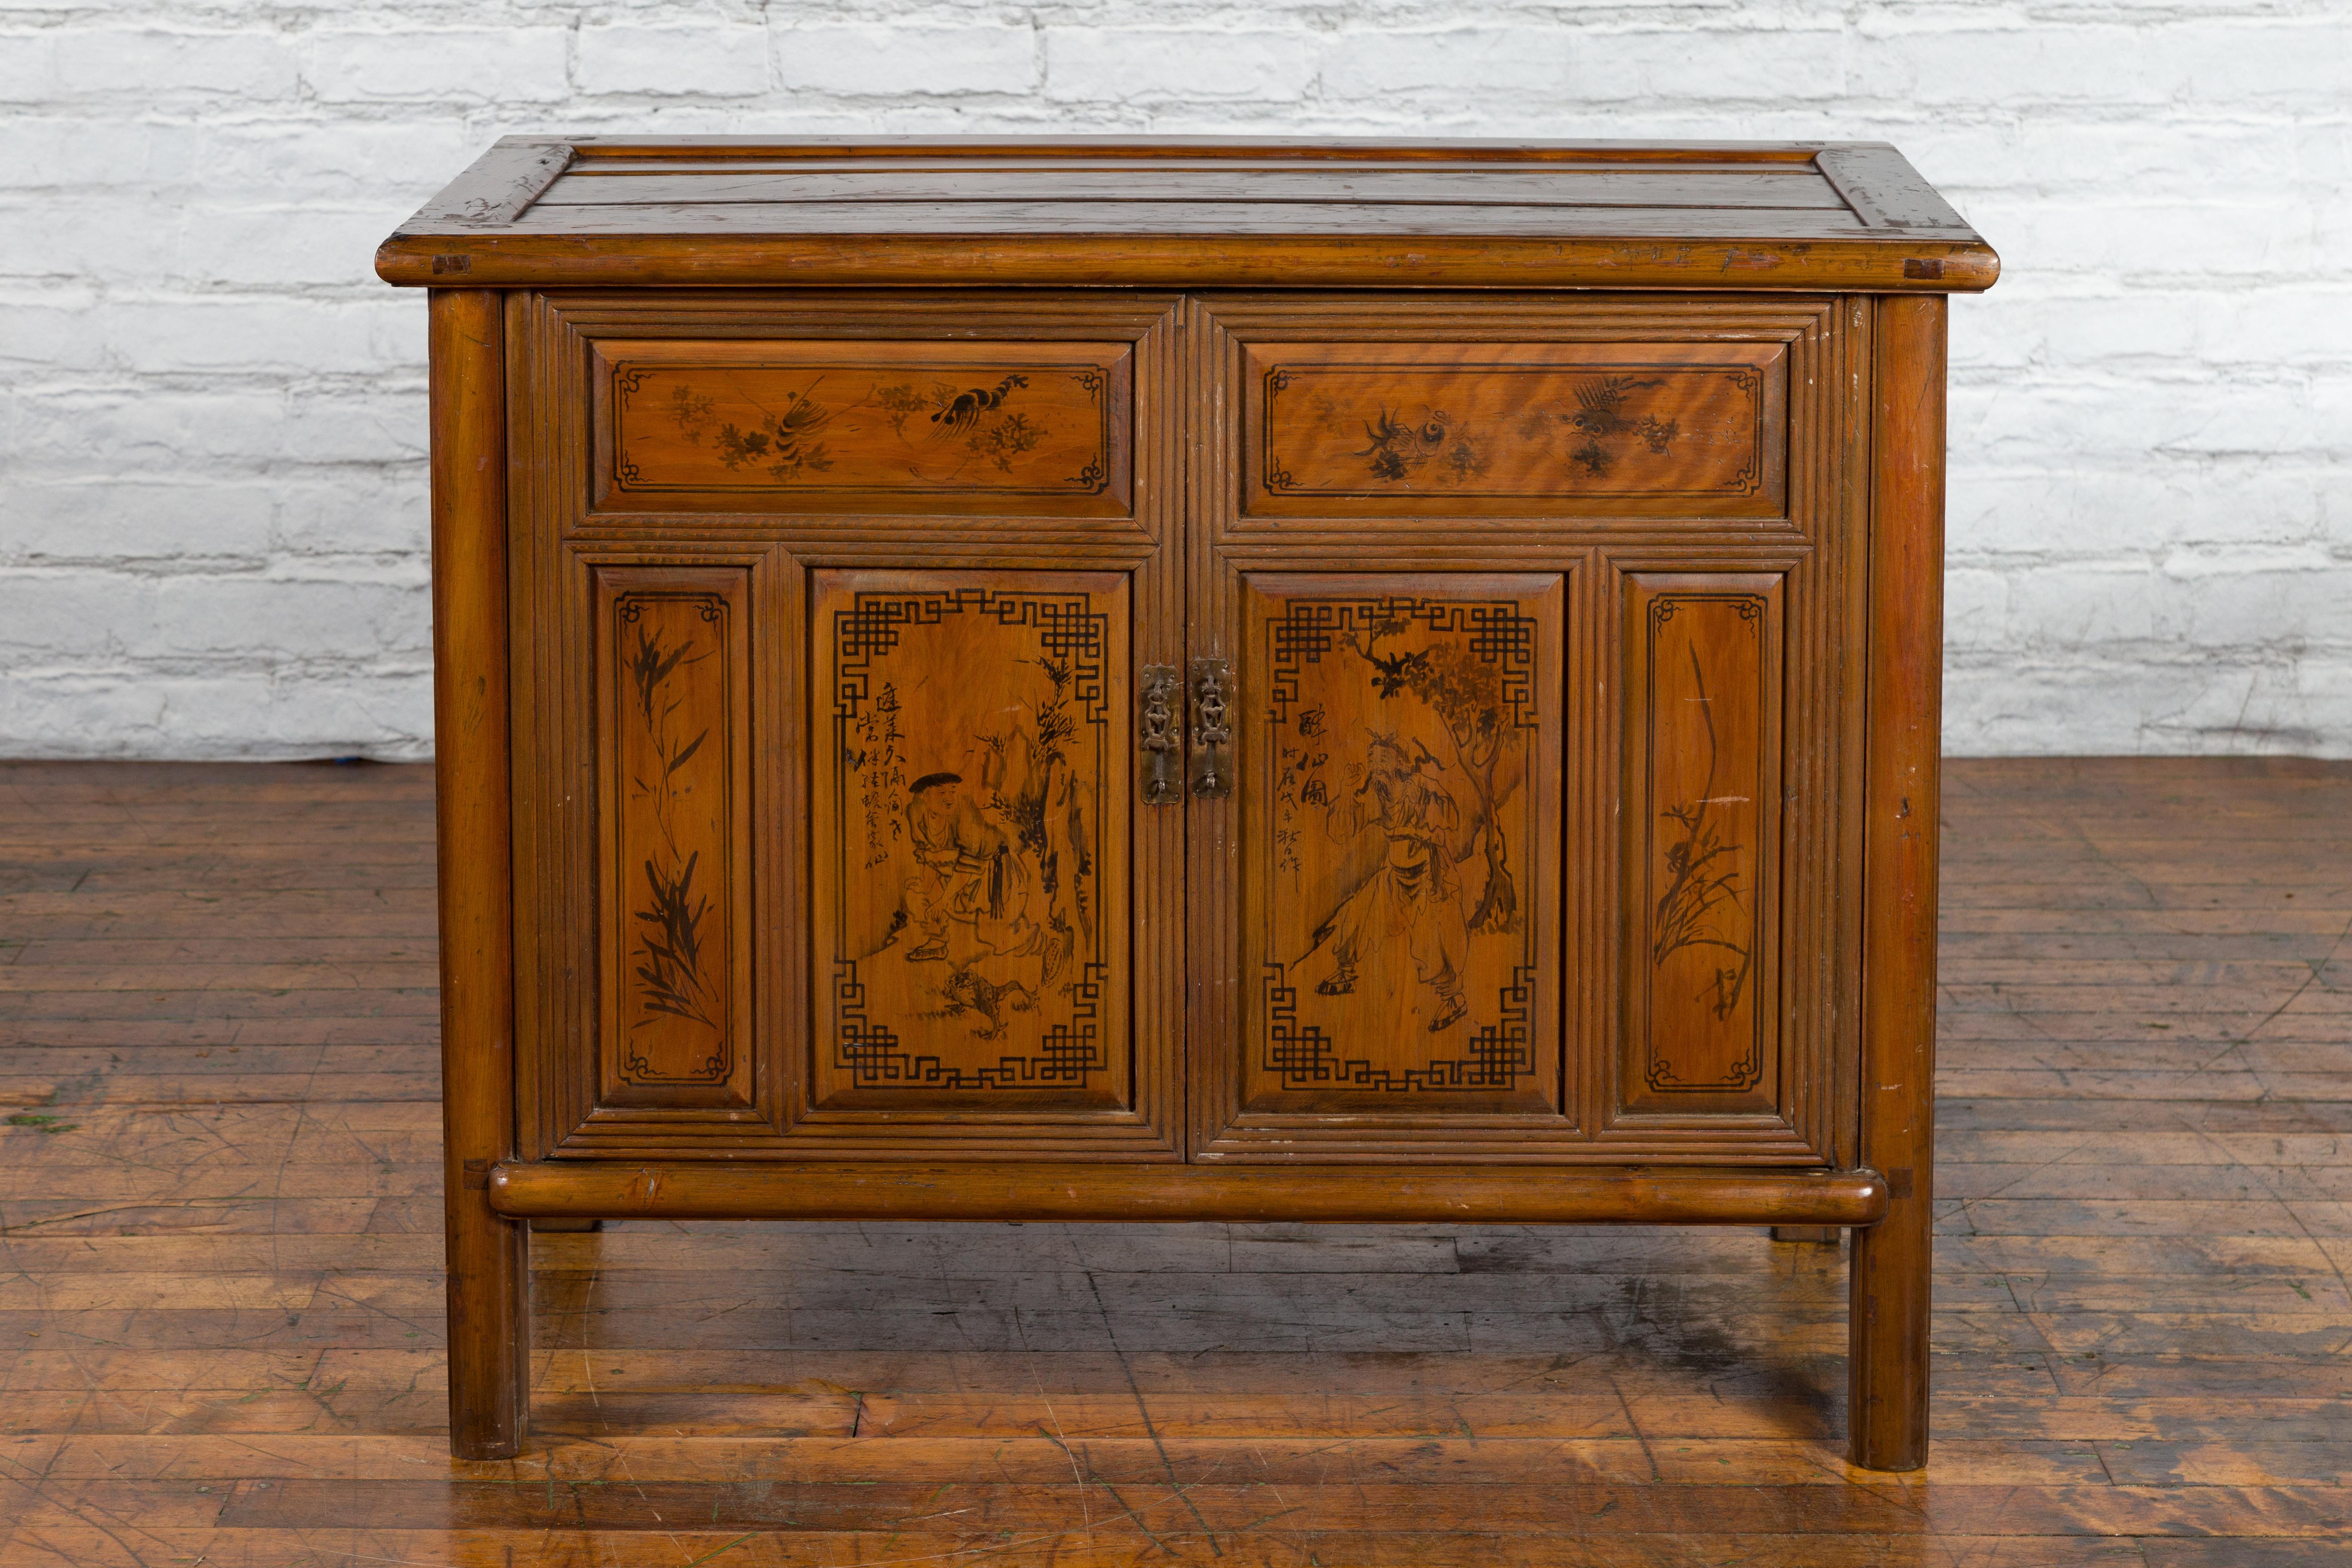 A Chinese antique cabinet from the early 20th century, with hand-painted décor and hidden double drawers. Created in China during the early years of the 20th century, this wooden cabinet features a rectangular top with recessed panel, sitting above